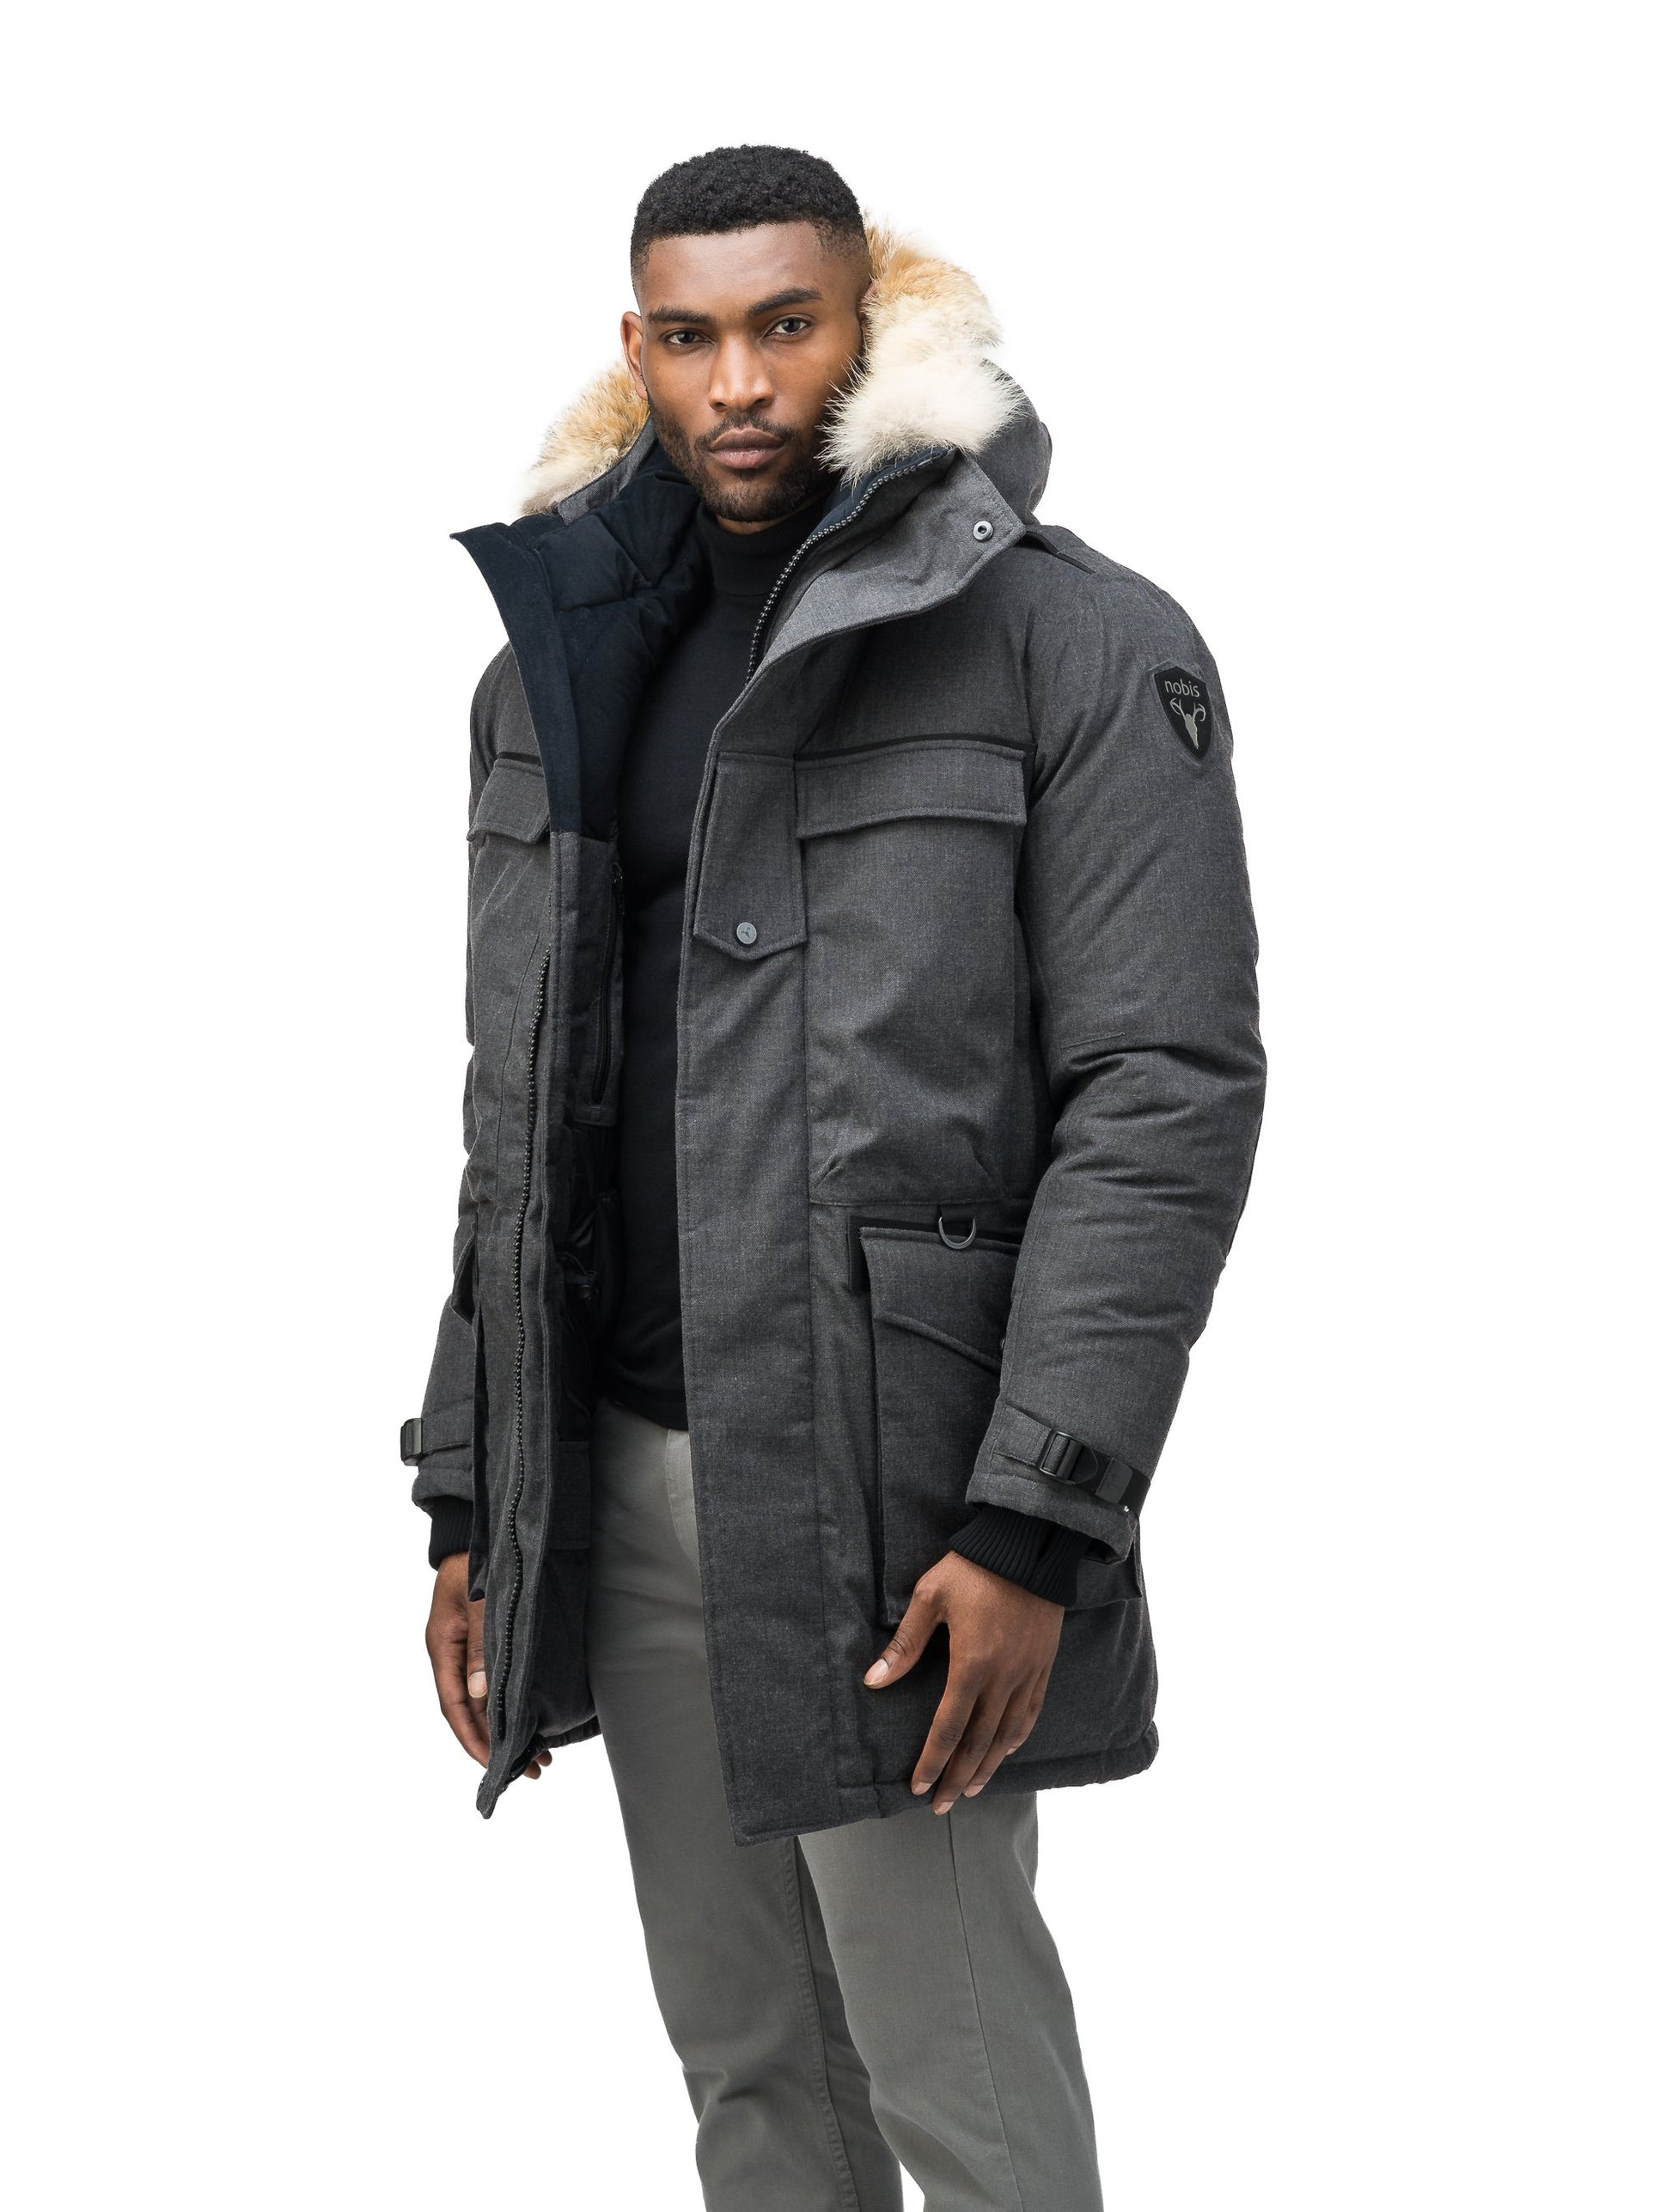 Men's extreme wamrth down filled parka with baffle box construction for even down distribution in H. Charcoal